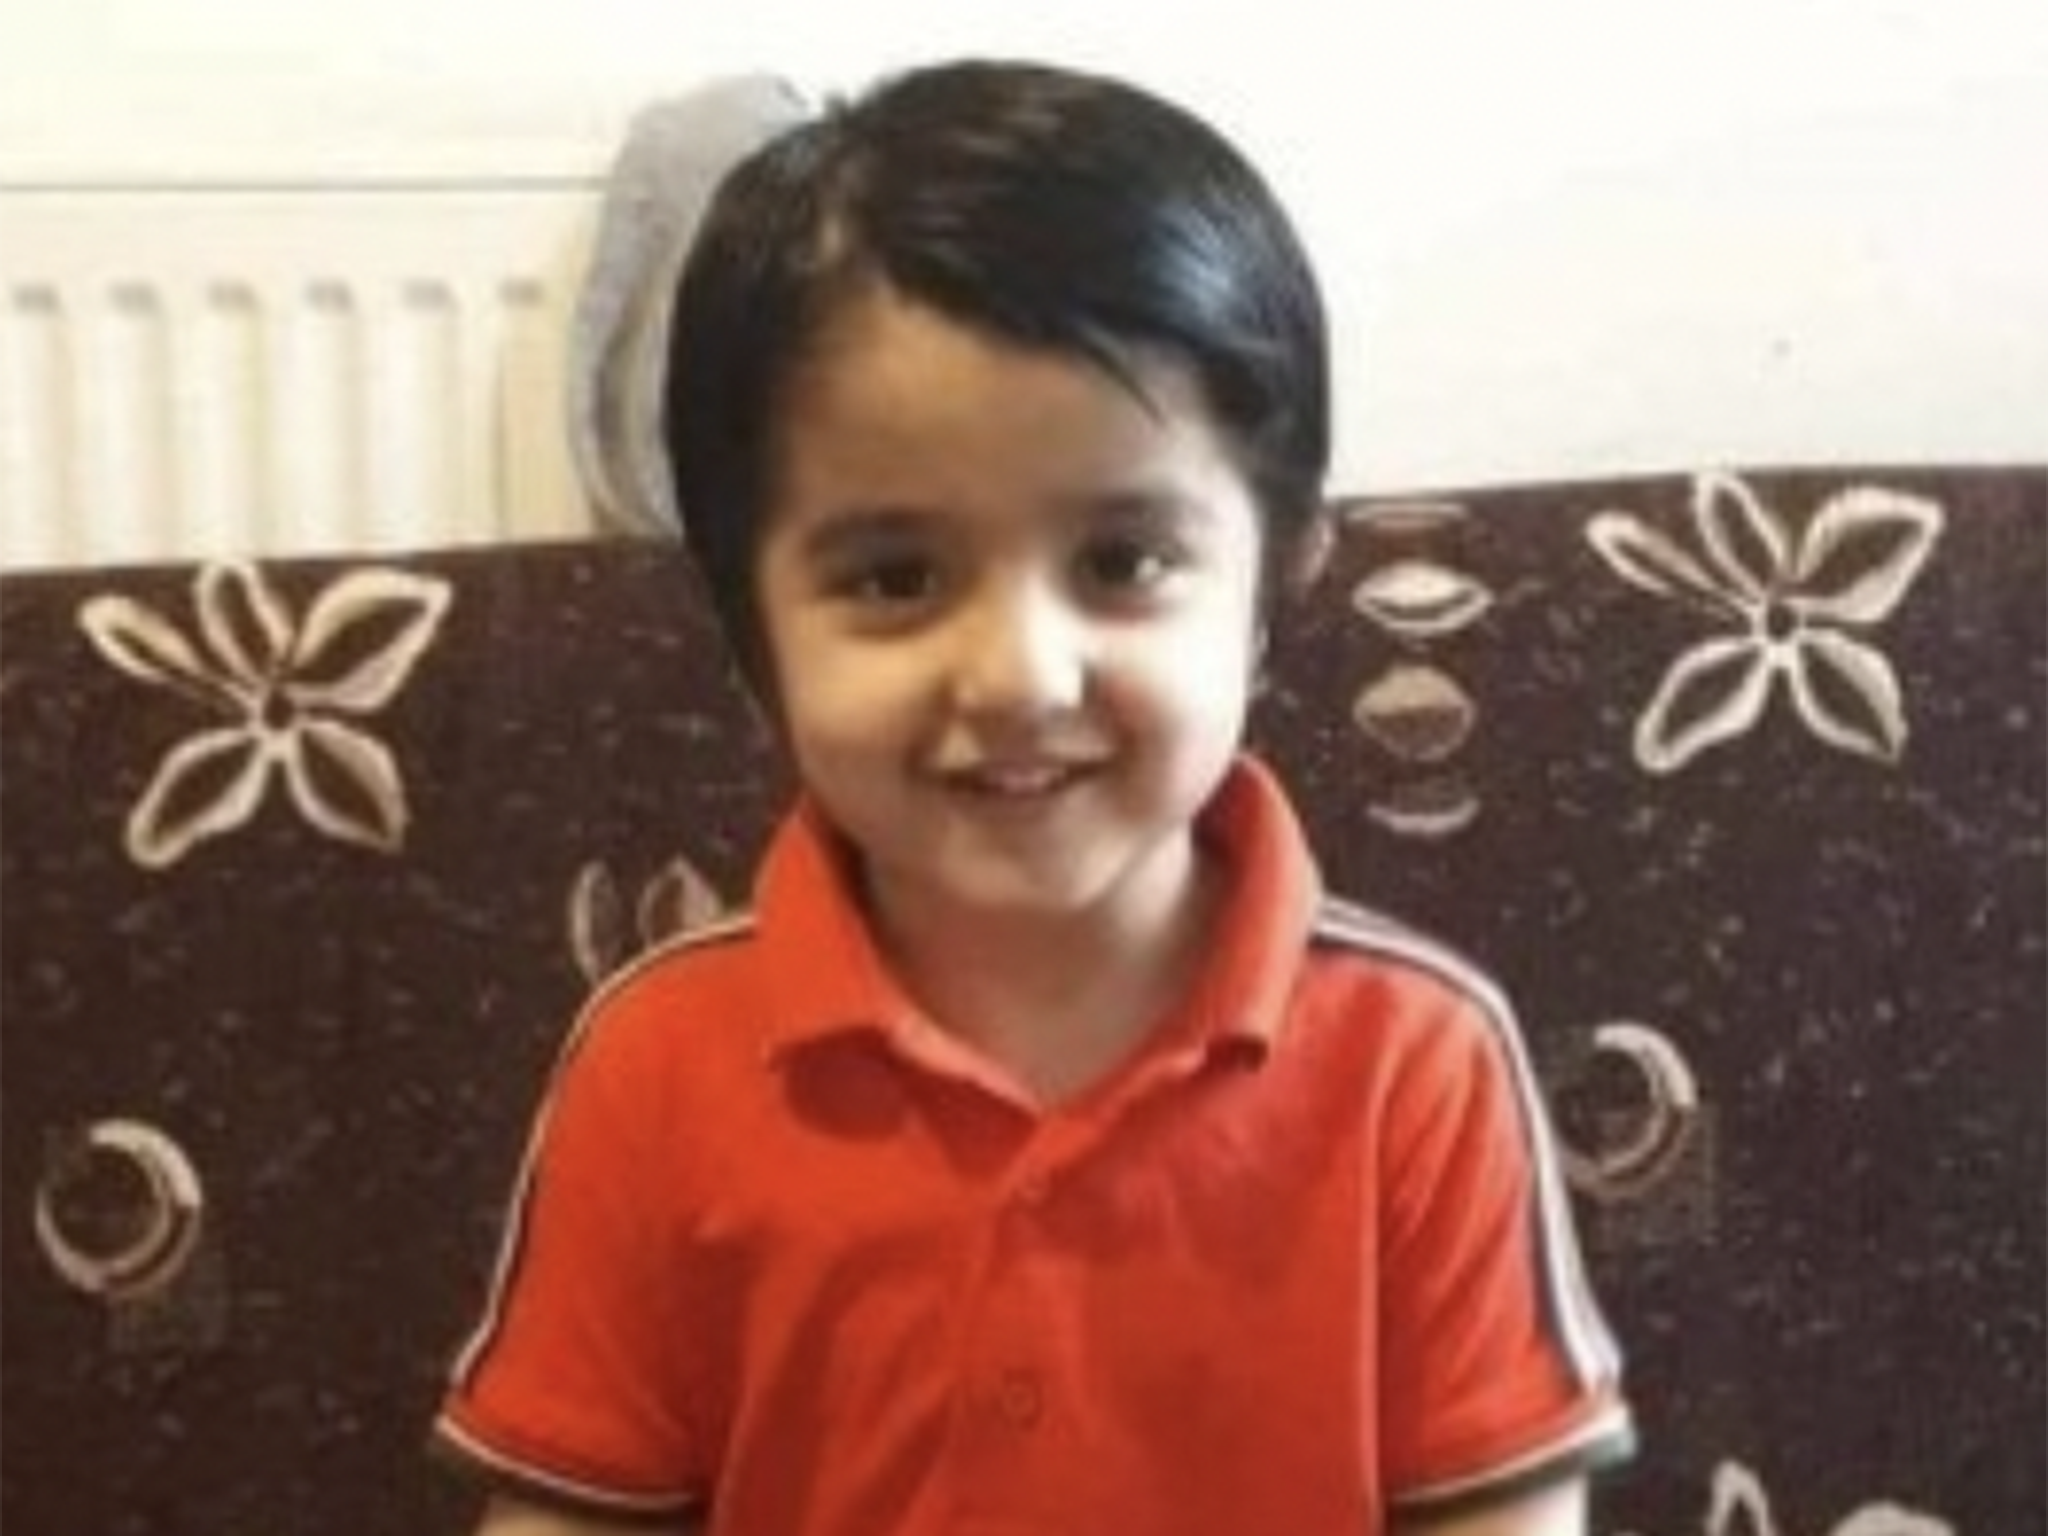 Muhammad Ibrahim Ali, 4, from Buckinghamshire, who did not survive the infection